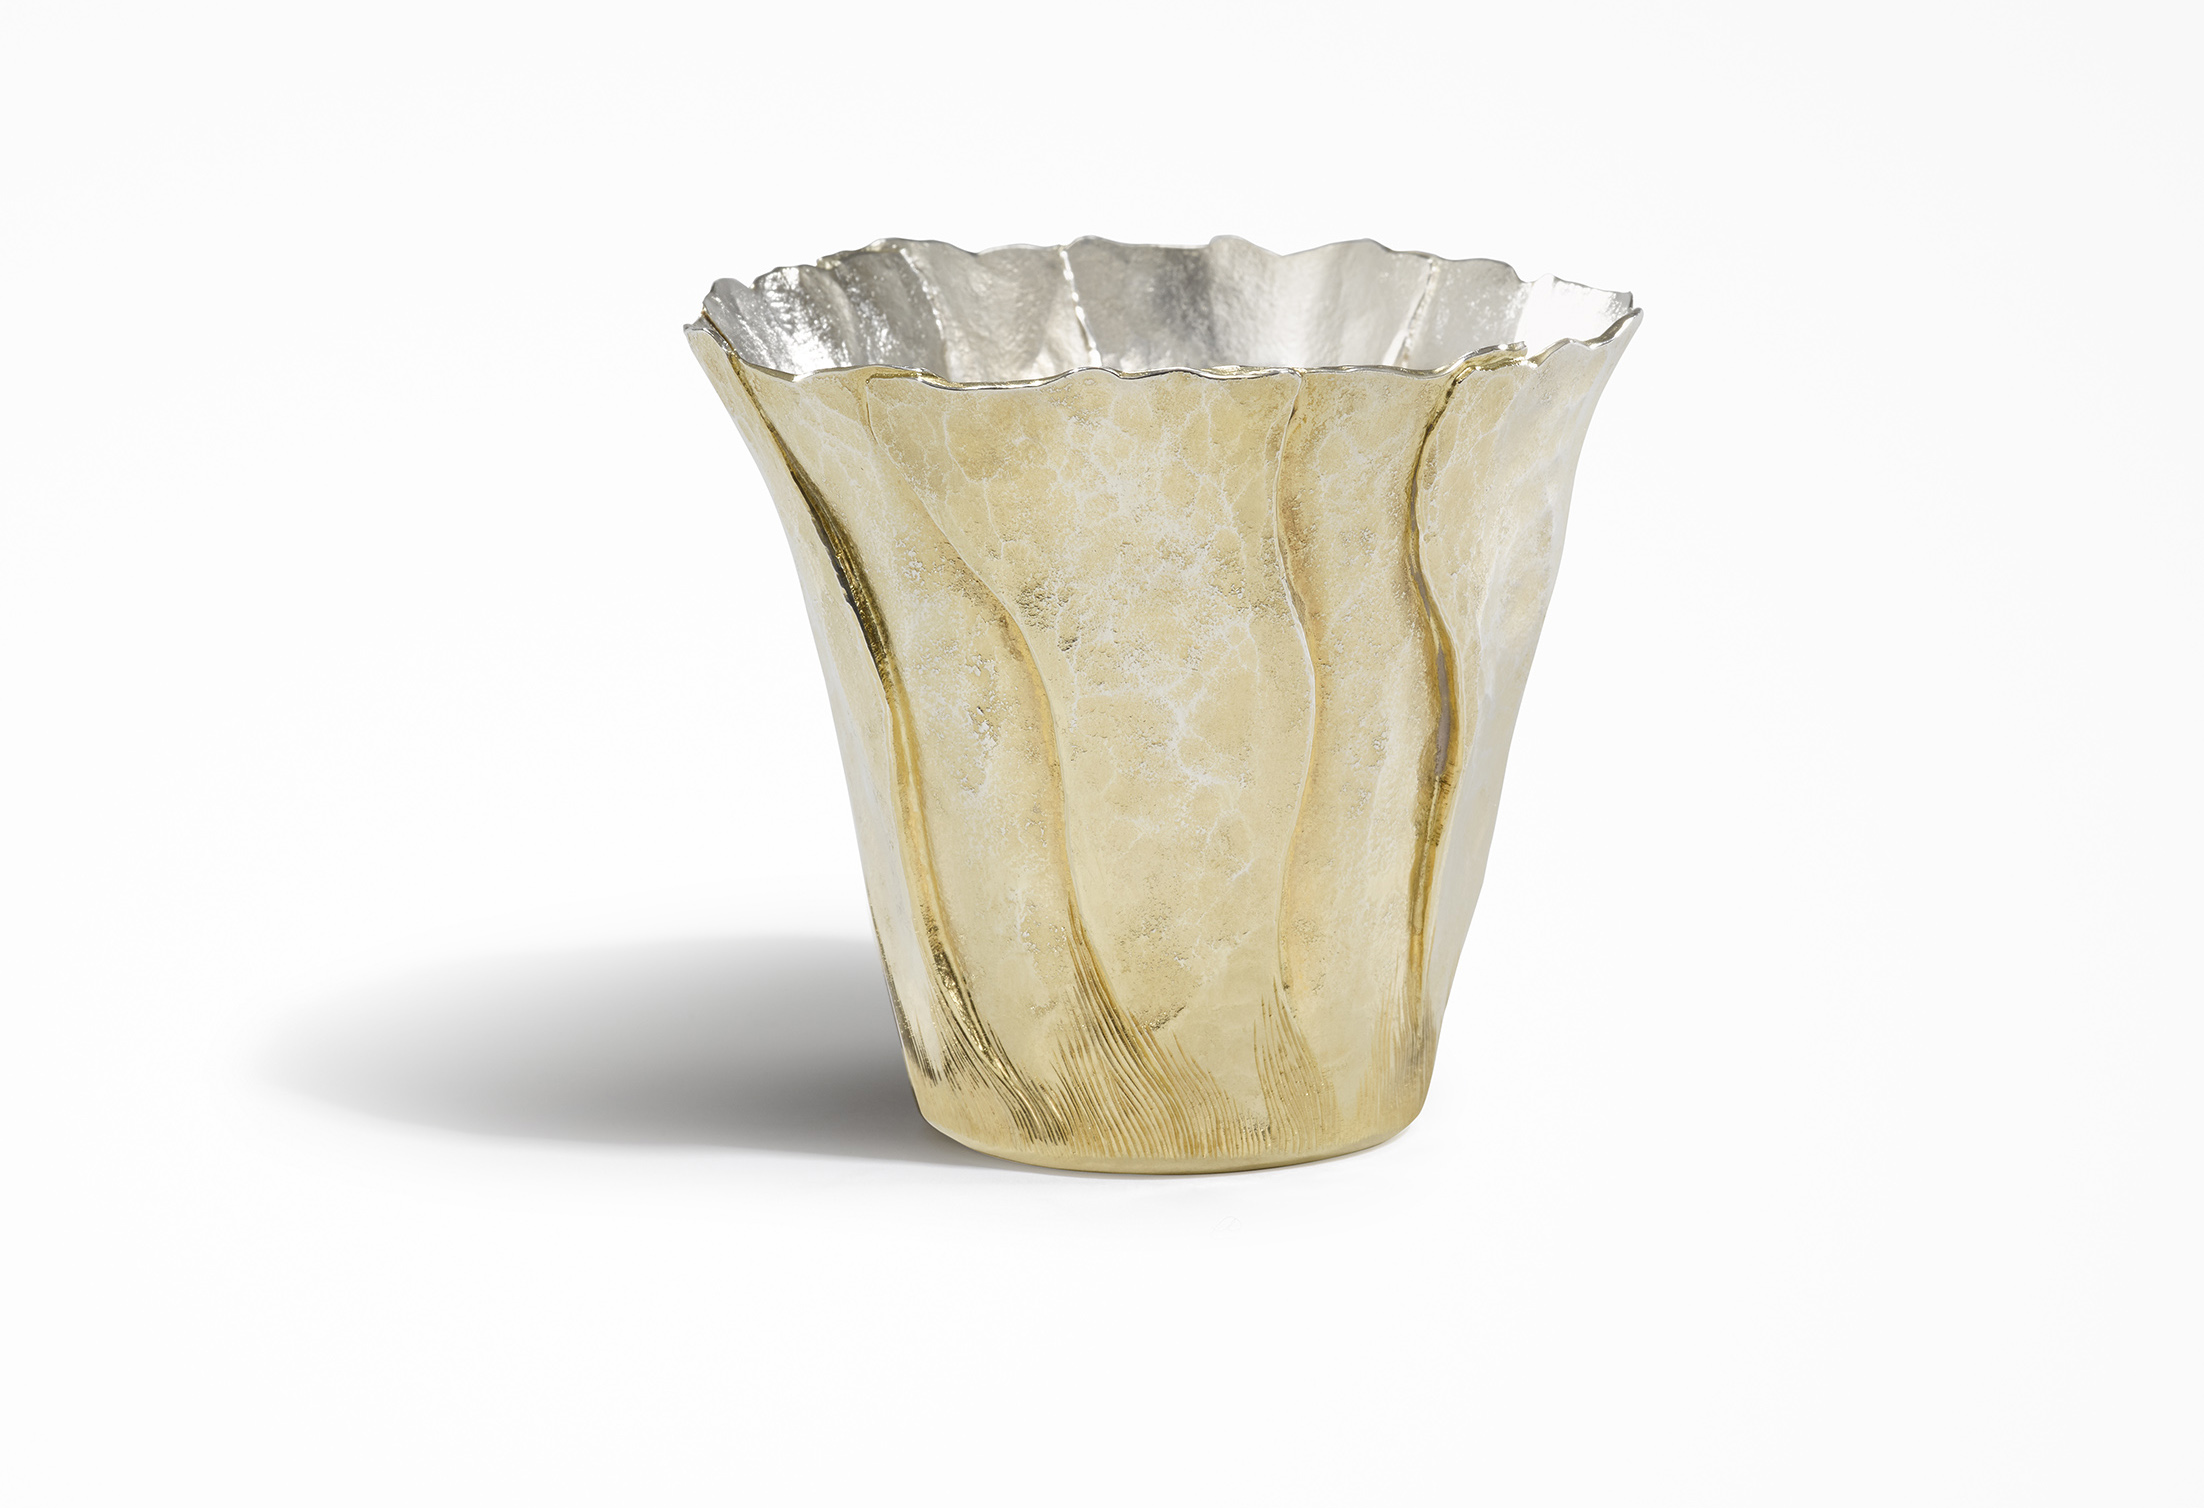 'Beaker', 2004, by Malcolm Appleby, Height: 7.5 cm Diameter: 8.5 cm. Image © The Goldsmiths’ Company. Courtesy ‘Collection: The Worshipful Company of Goldsmiths'.'